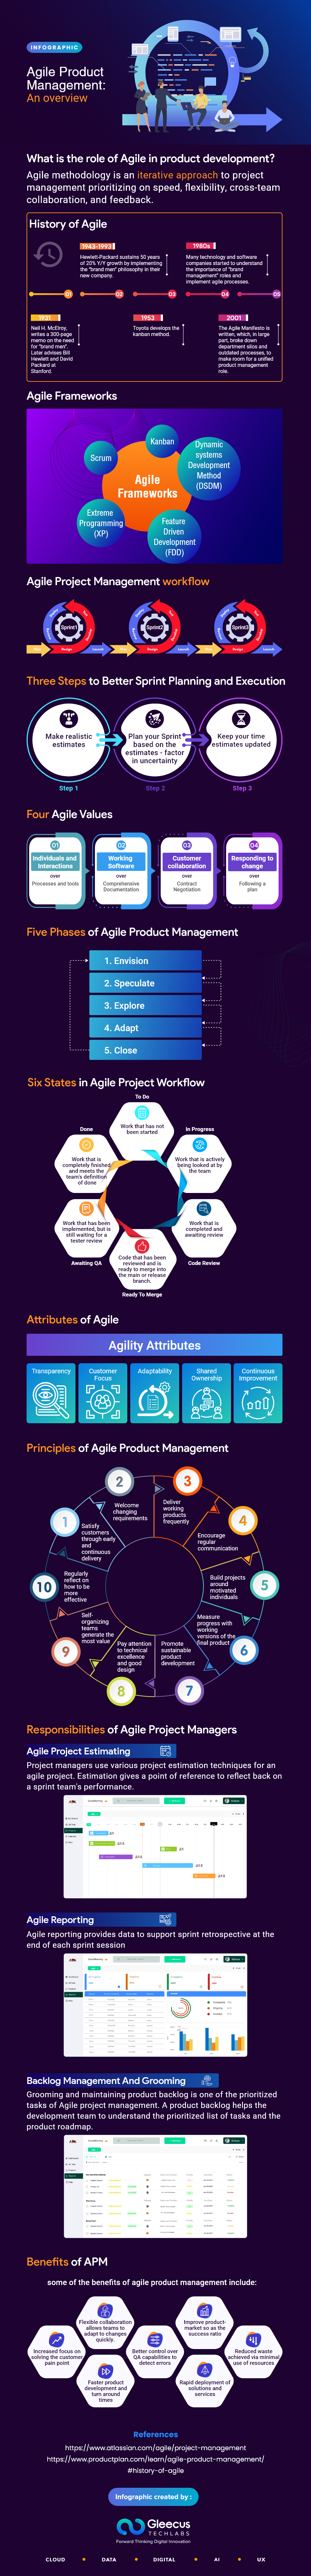 Agile Product Management - Infographic